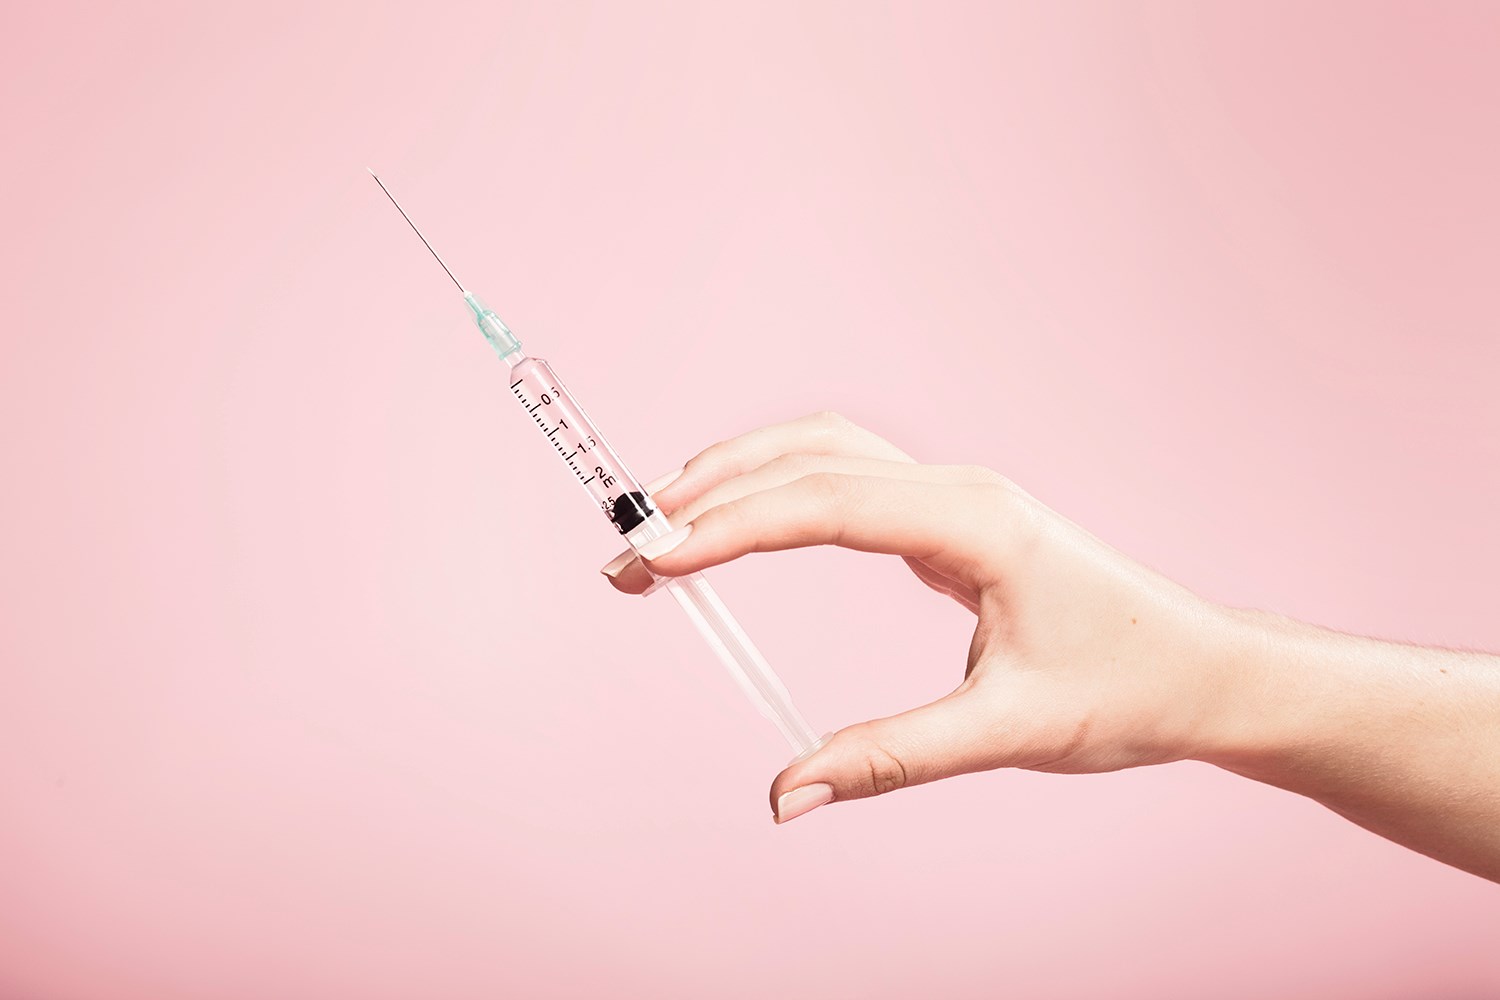 Mother Jailed After Refusing To Have Son Vaccinated